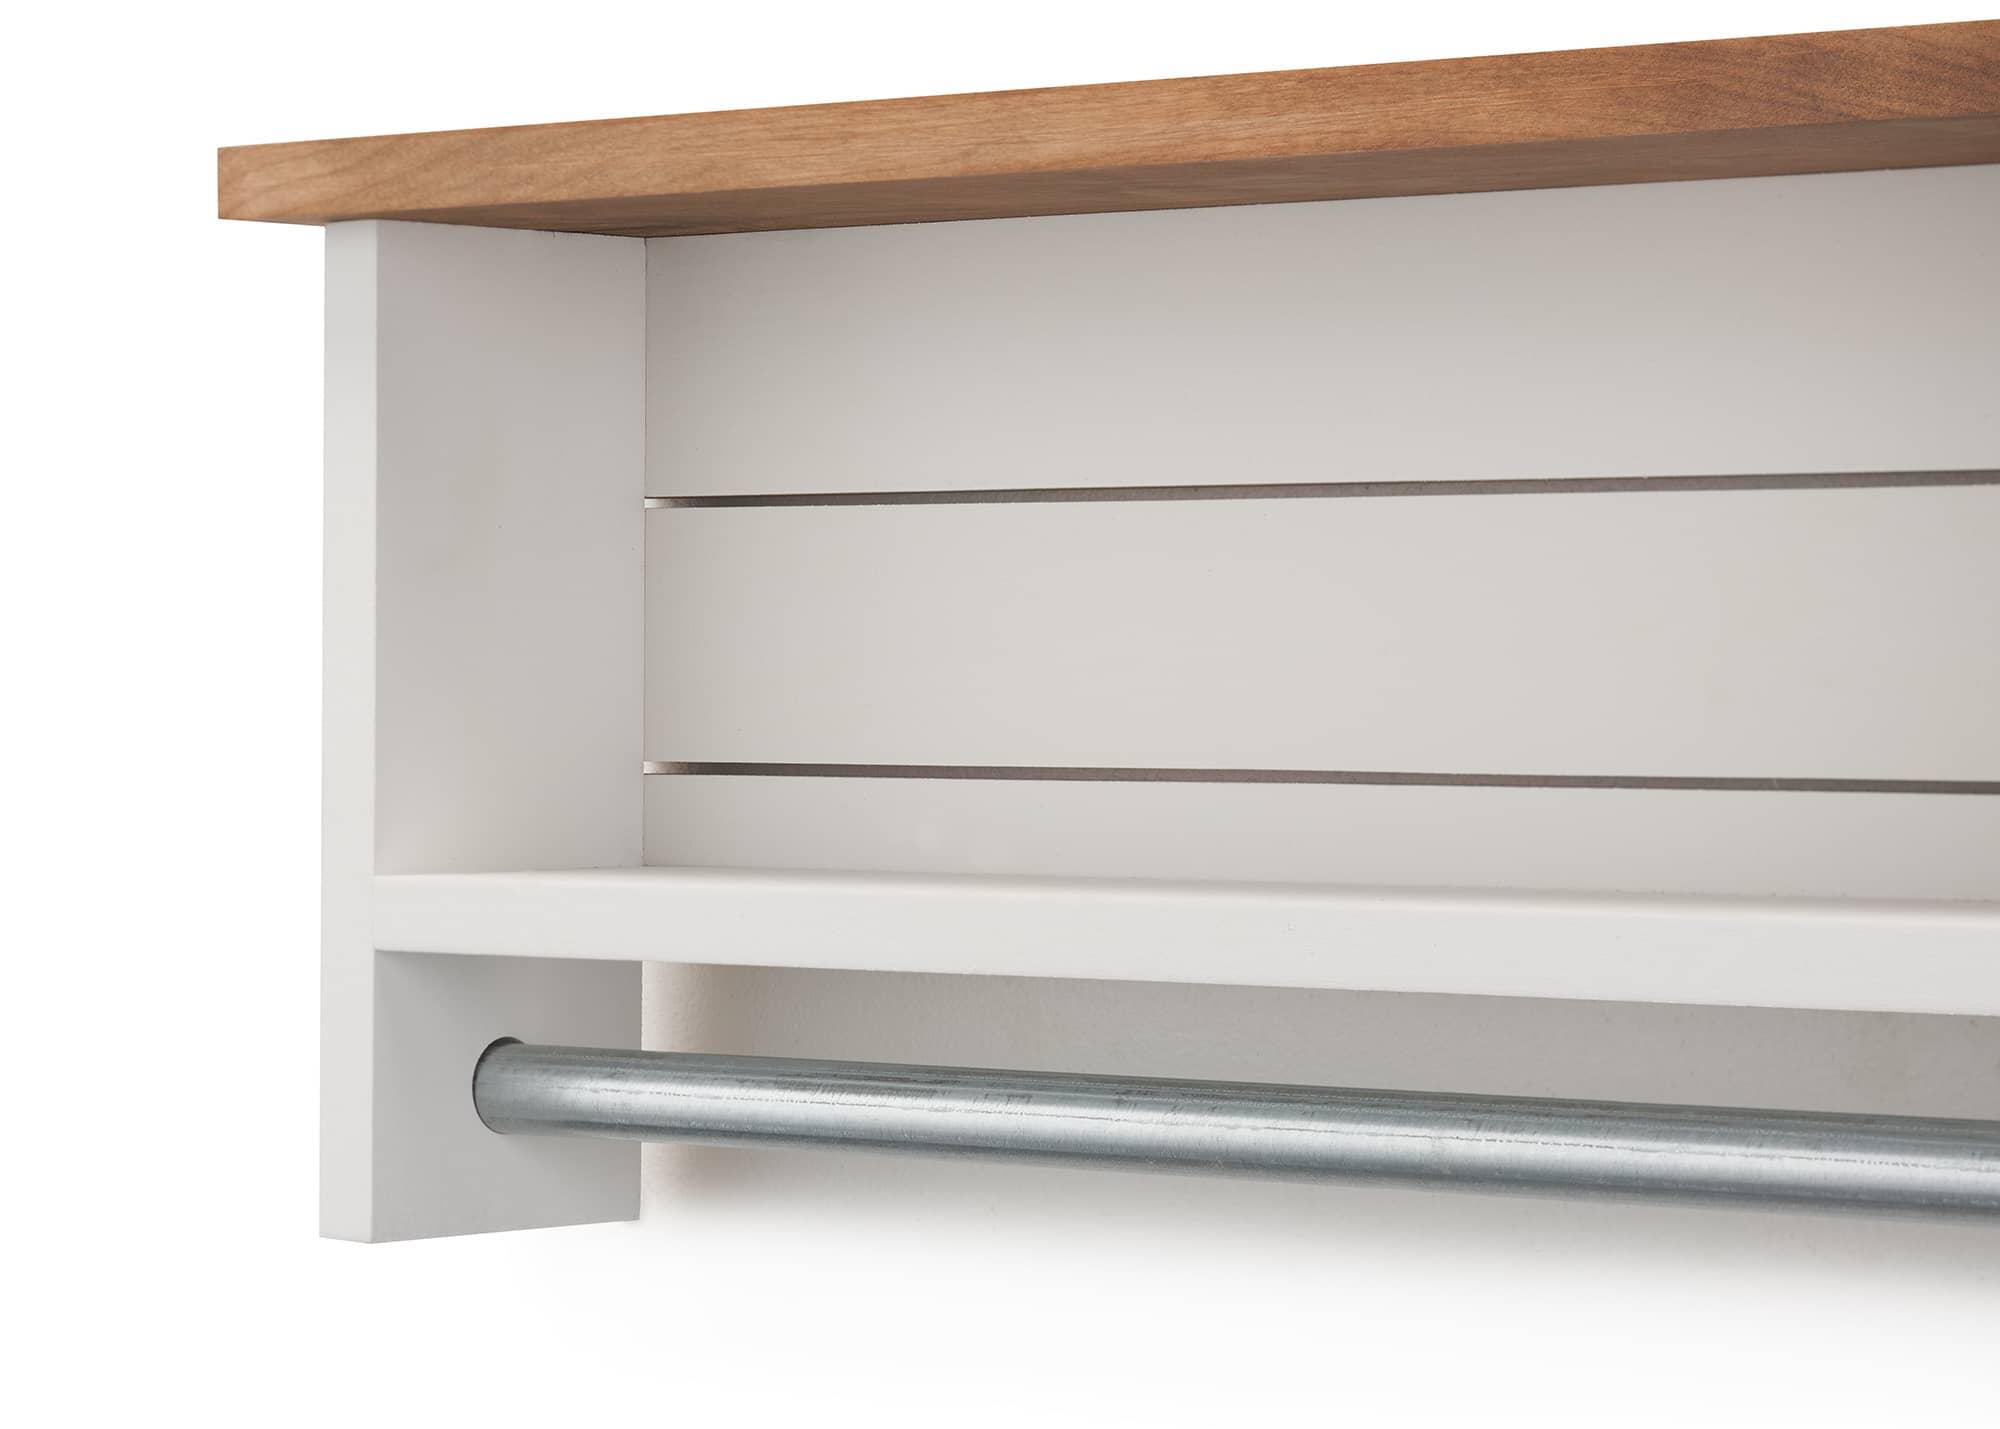 details of the shelf and the metal towel bar